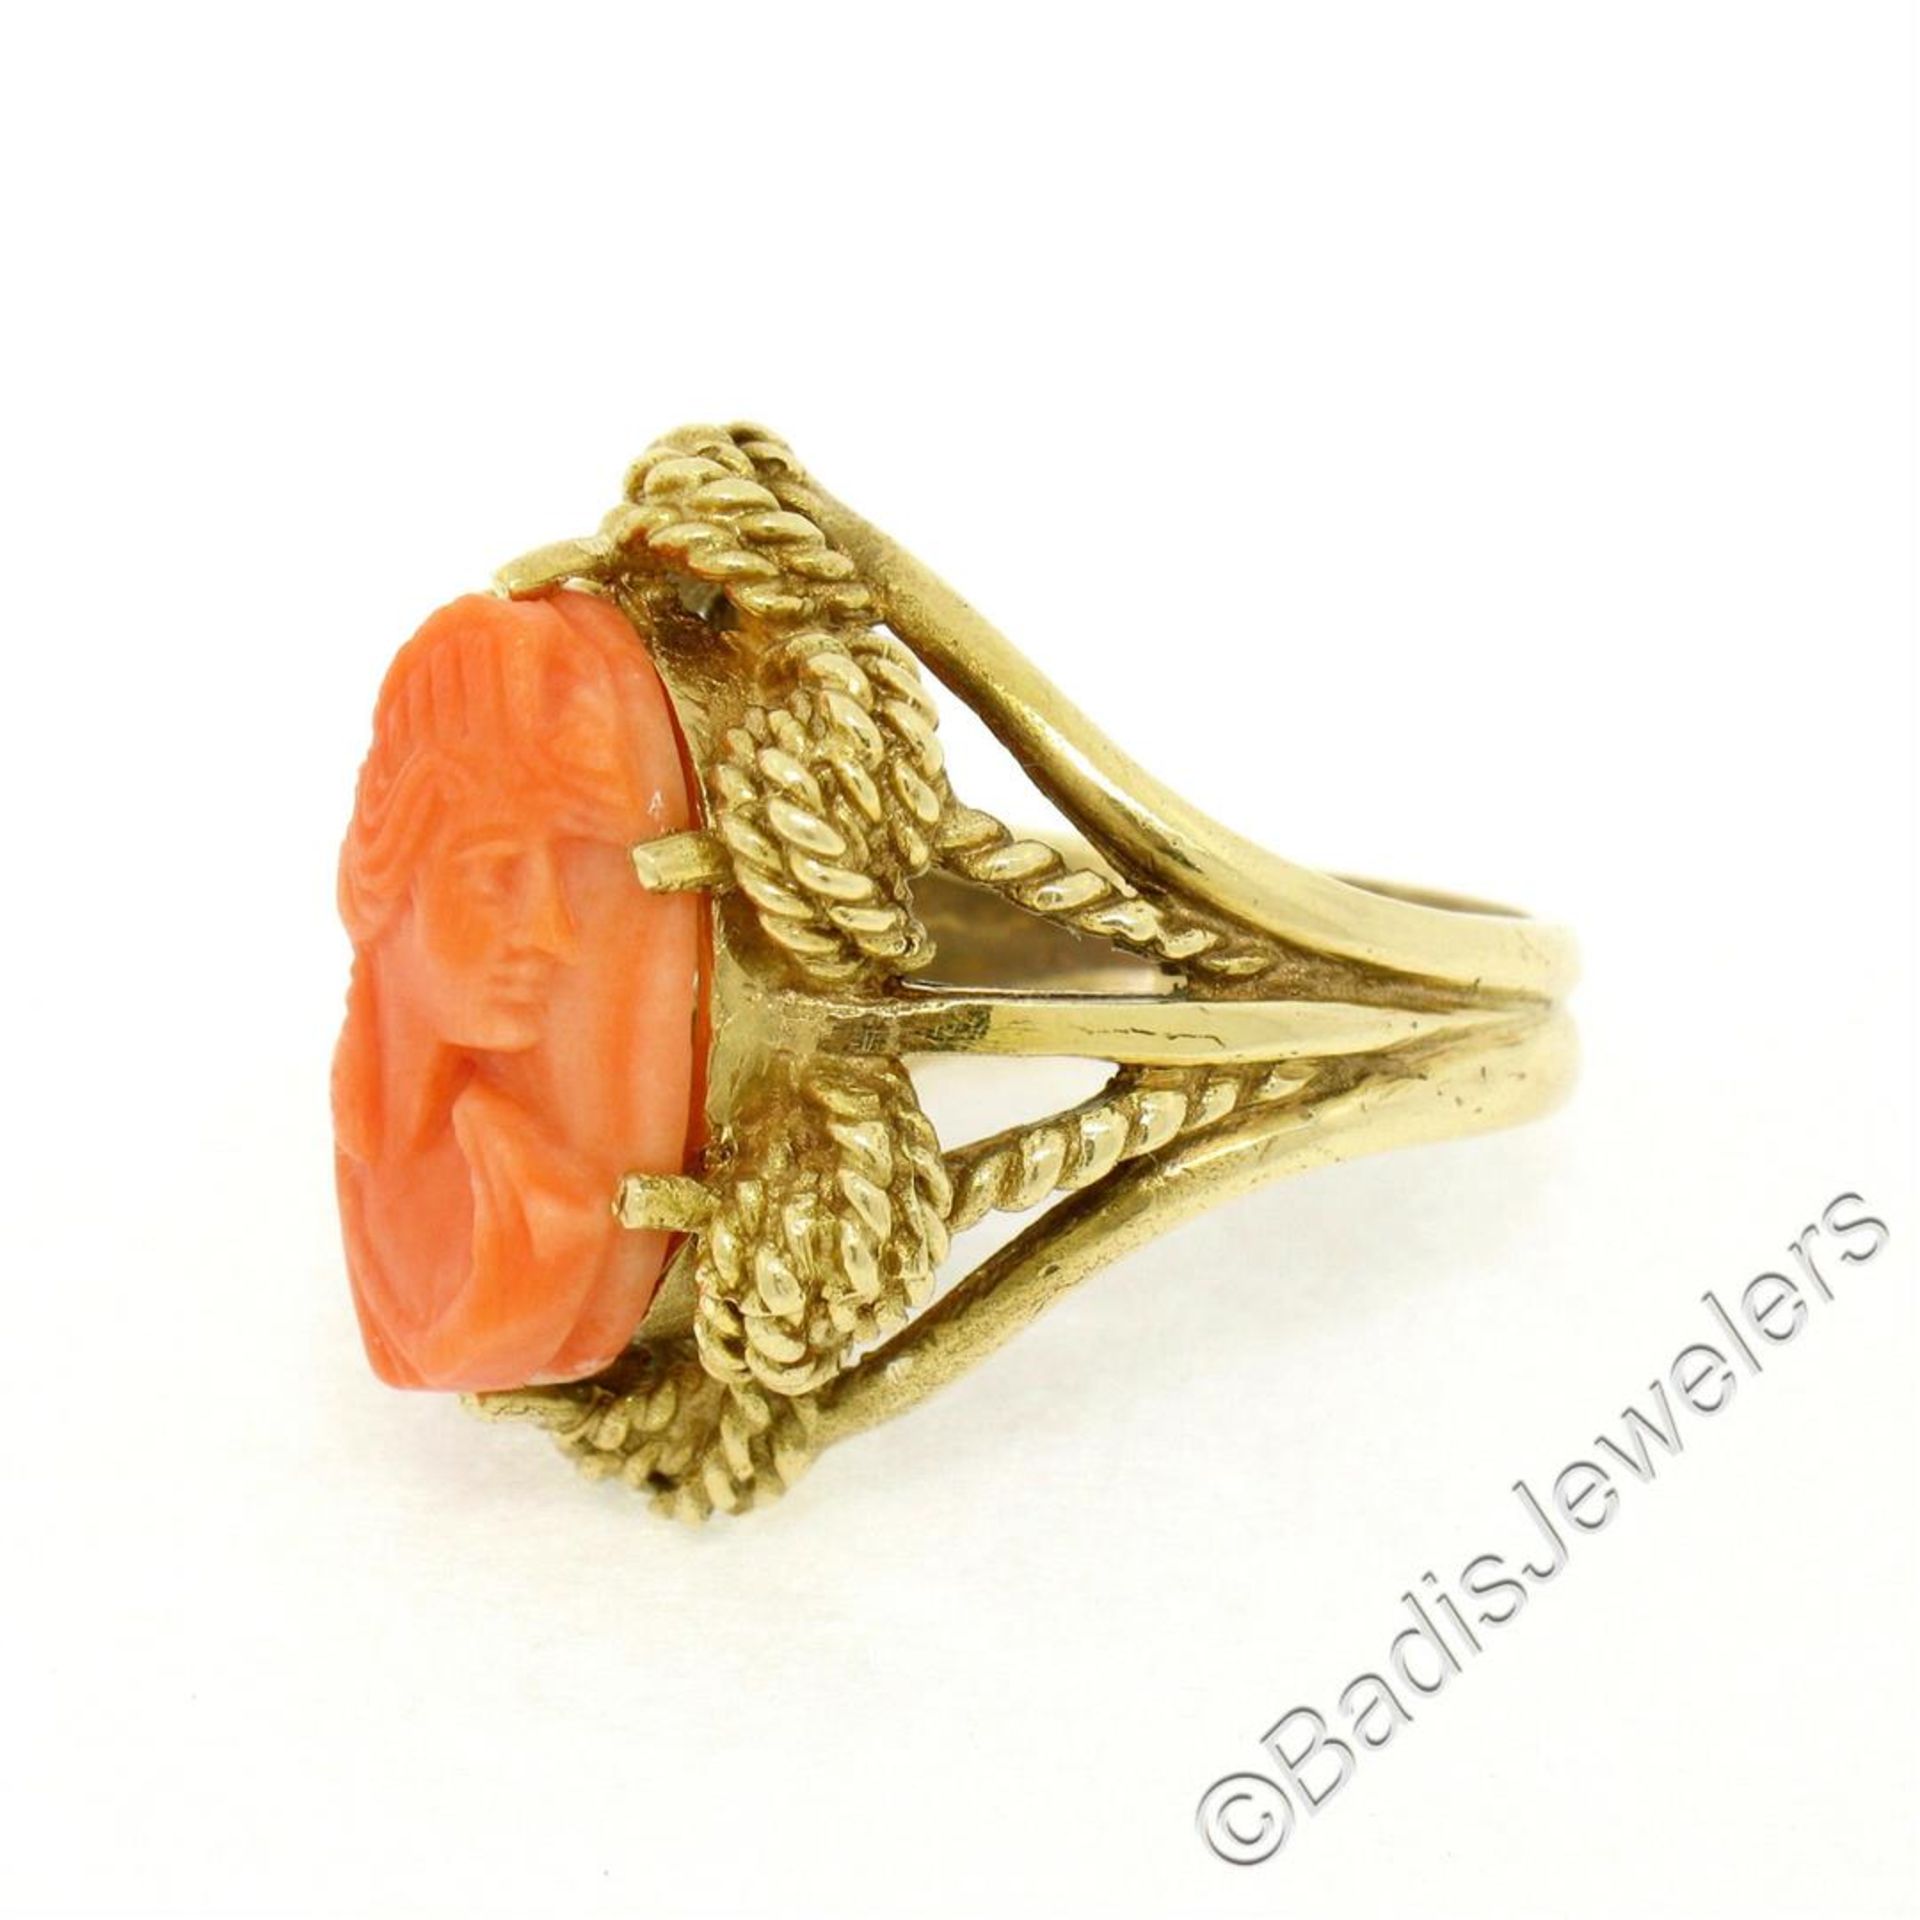 Vintage 14kt Yellow Gold Carved Coral Cameo Solitaire Ring - Image 5 of 7